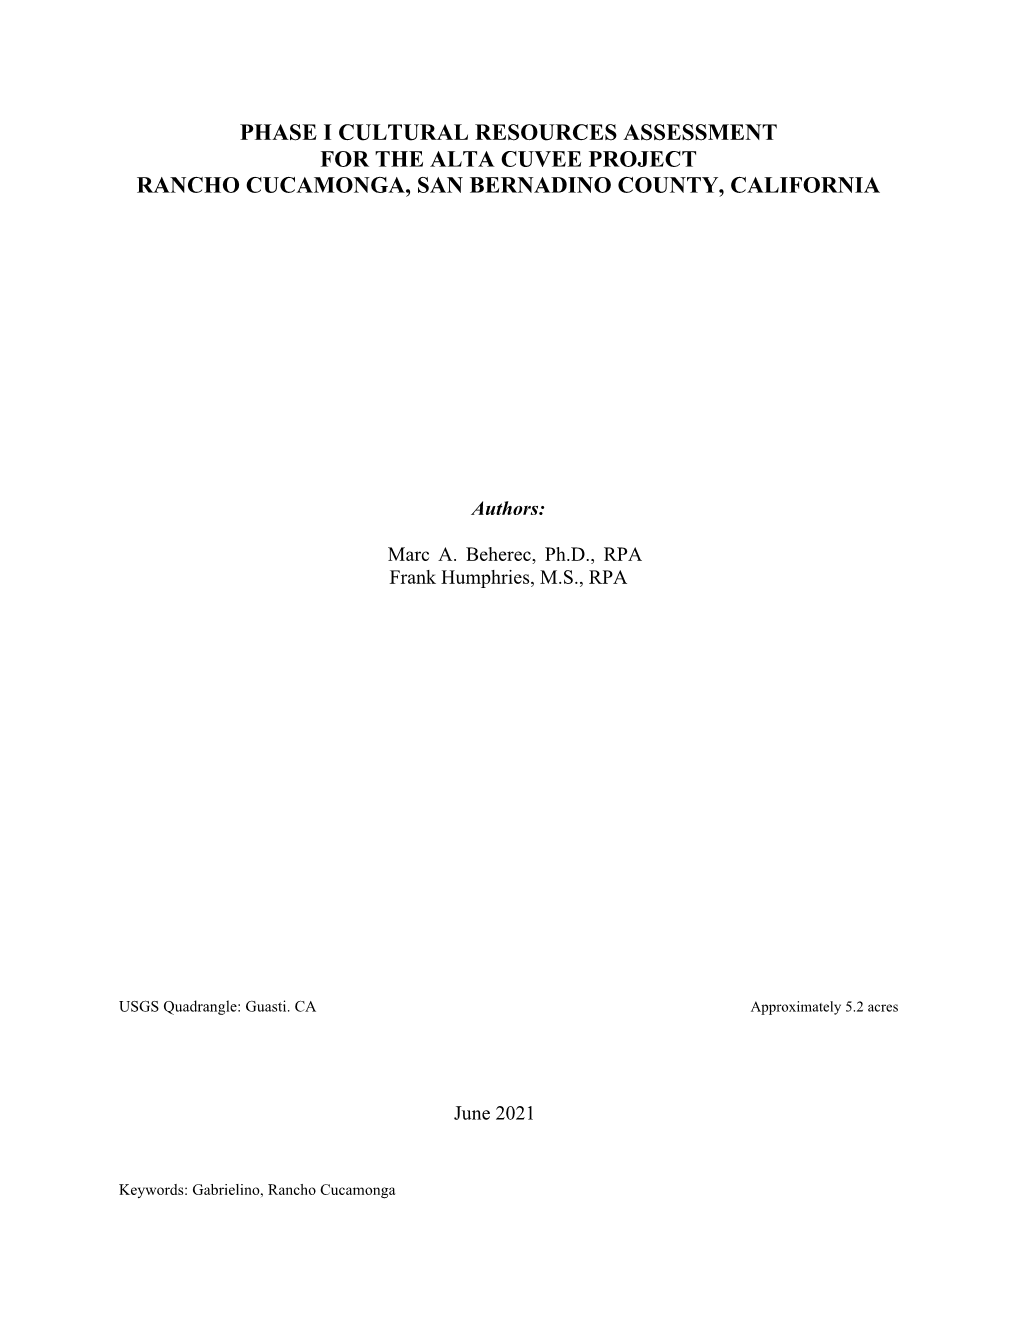 Phase I Cultural Resources Assessment for the Alta Cuvee Project Rancho Cucamonga, San Bernadino County, California